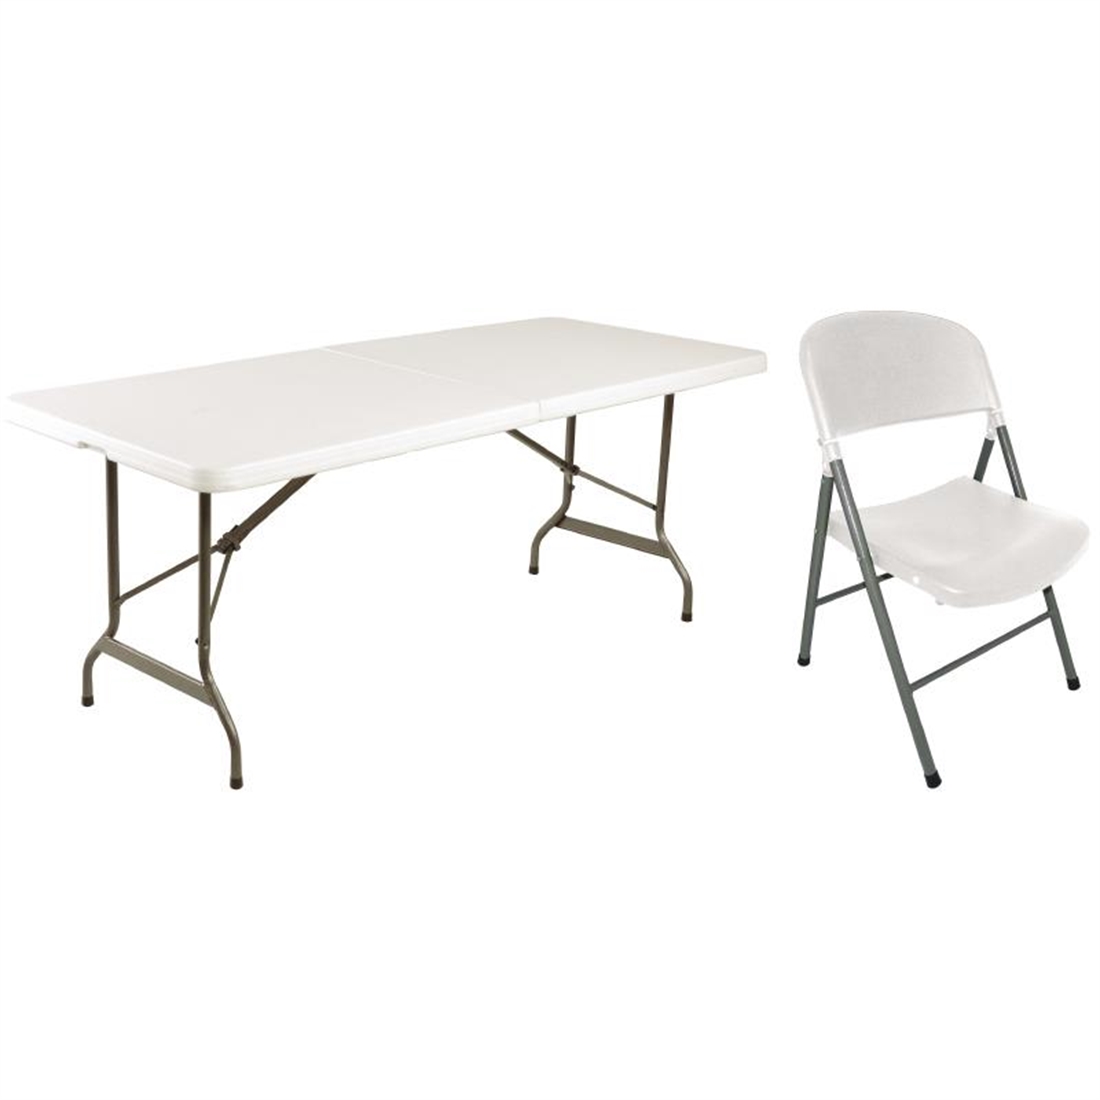 Special Offer Bolero 6ft Centre Folding Table with Six Folding Chairs